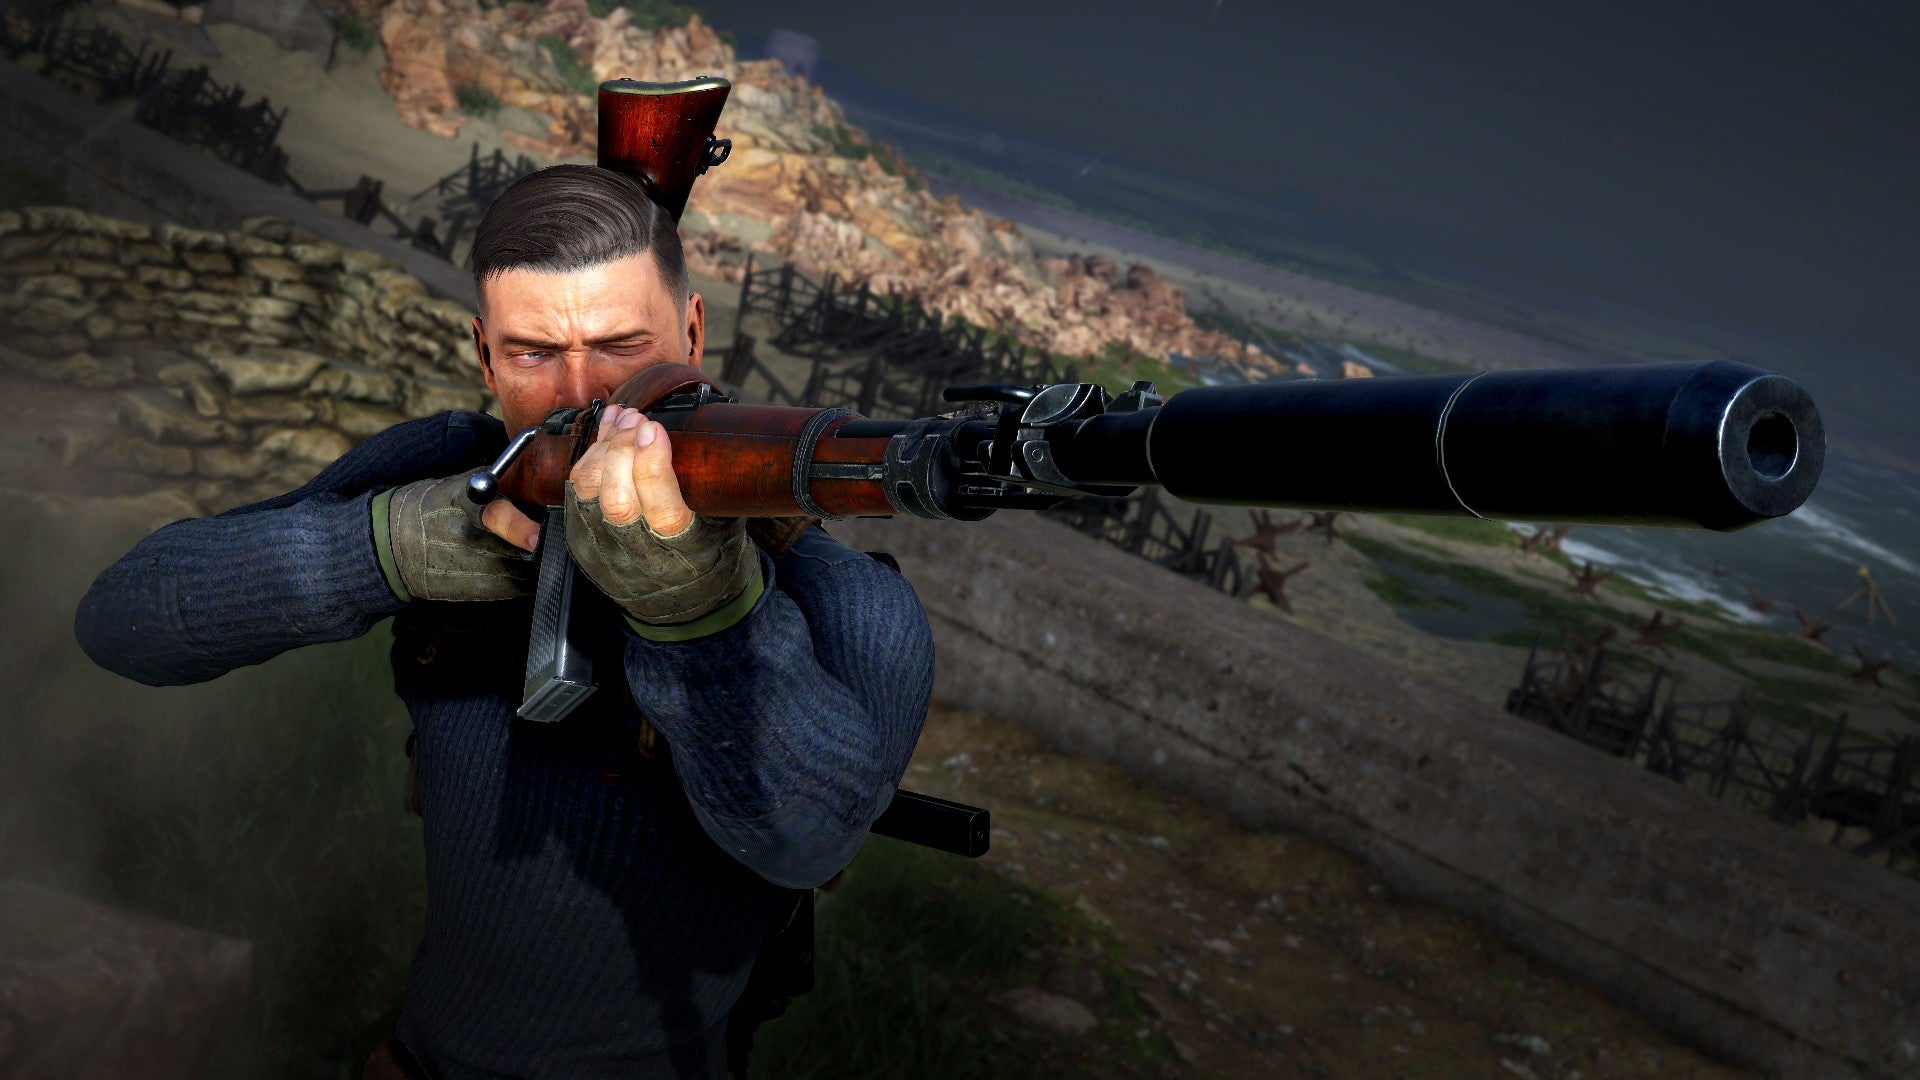 Sniper Elite's Karl Fairburne aims with a suppressed rifle